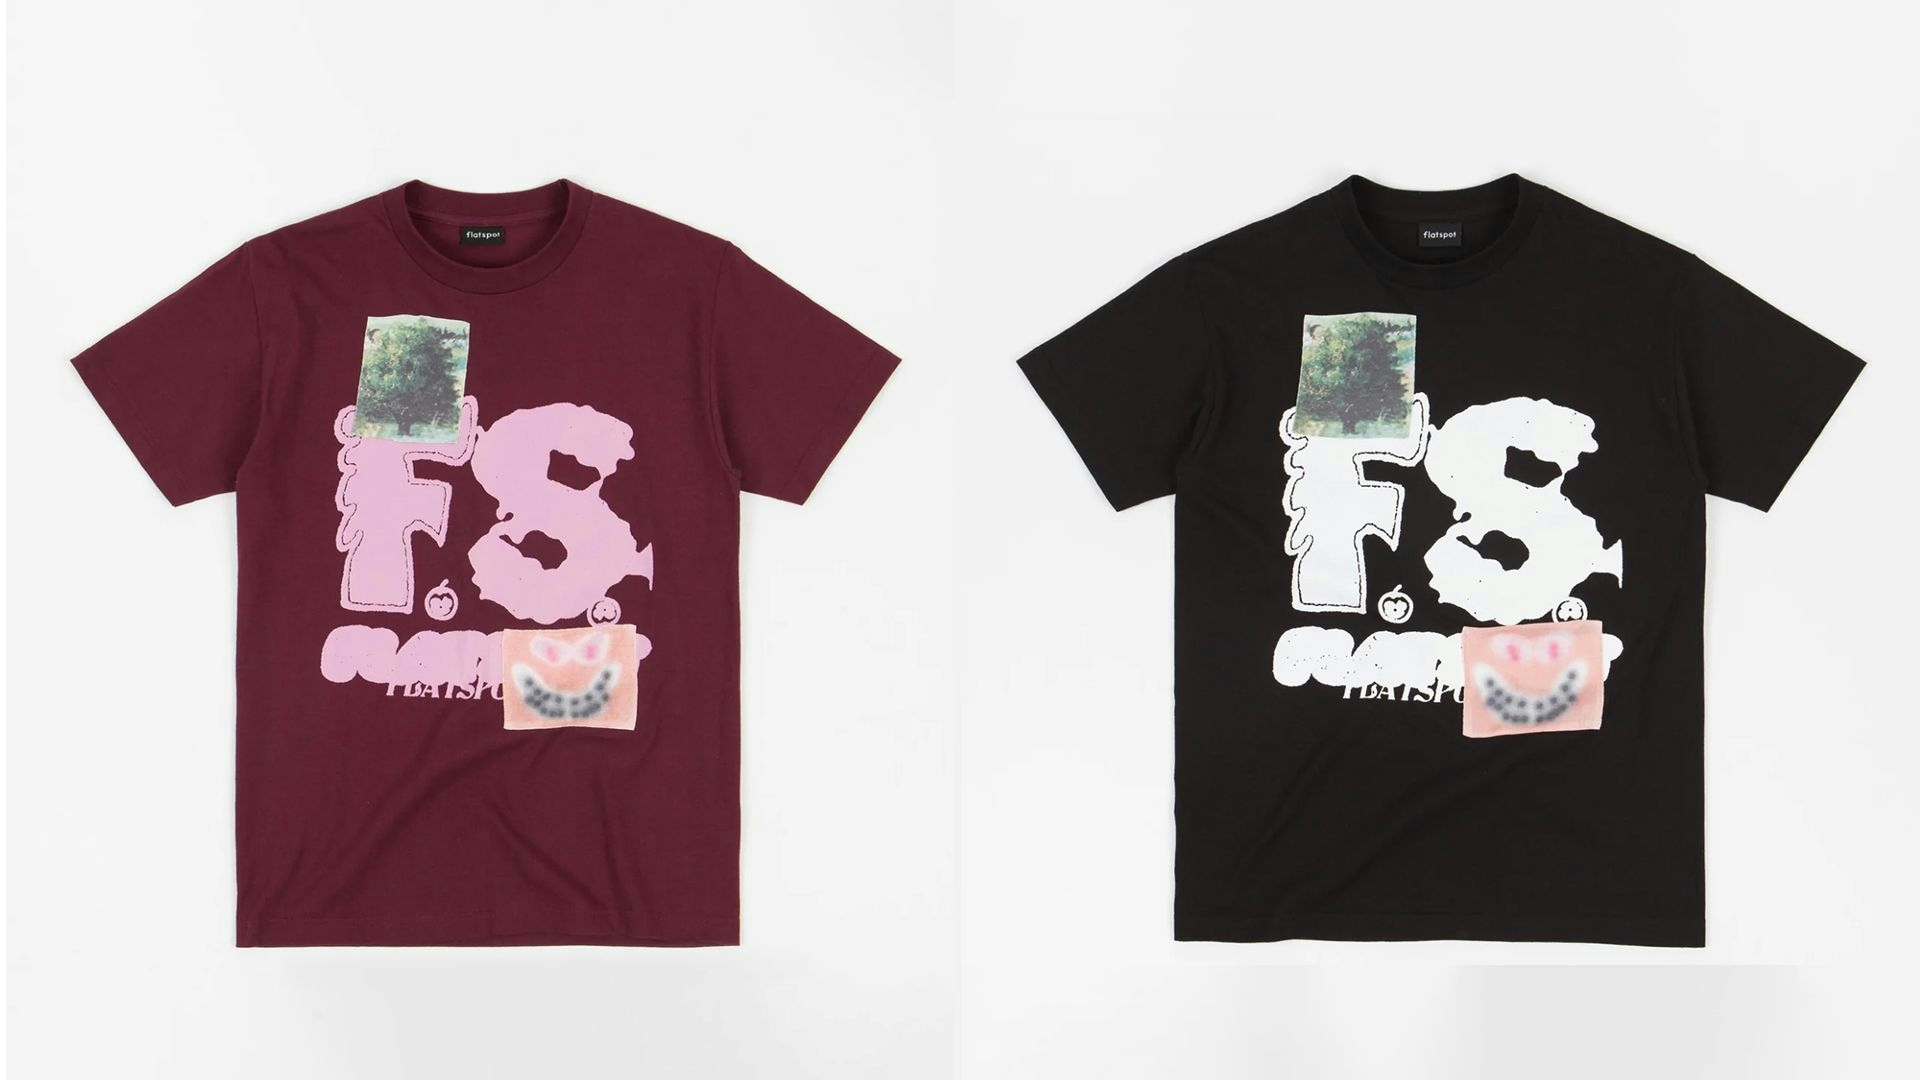 Flatspot AW21 Collection F.S. graphic tees in maroon and black